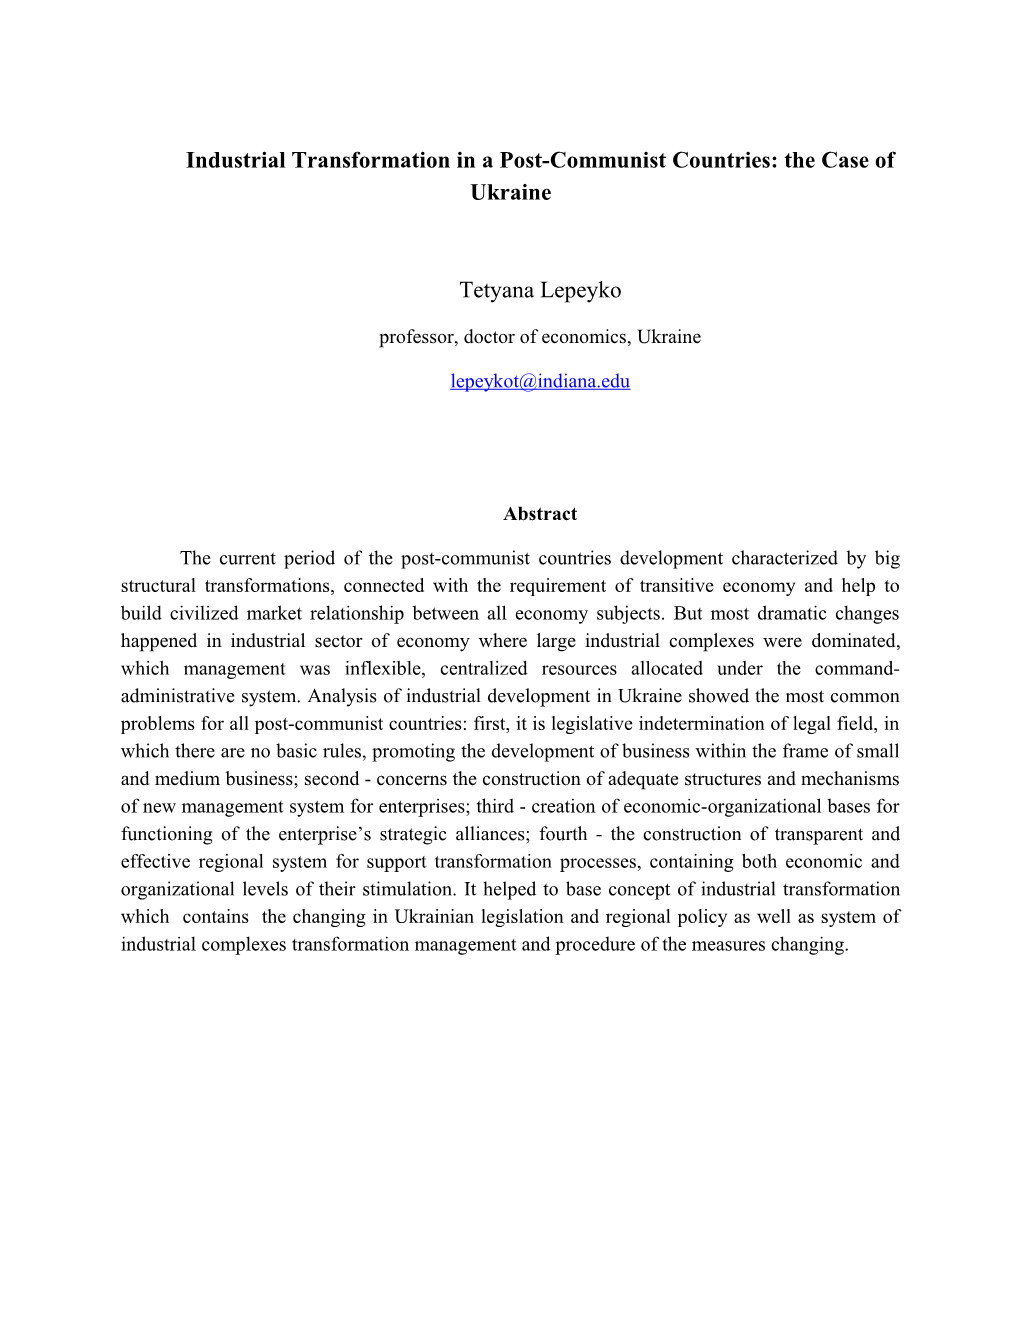 Industrial Transformation in a Post-Communist Countries: the Case of Ukraine